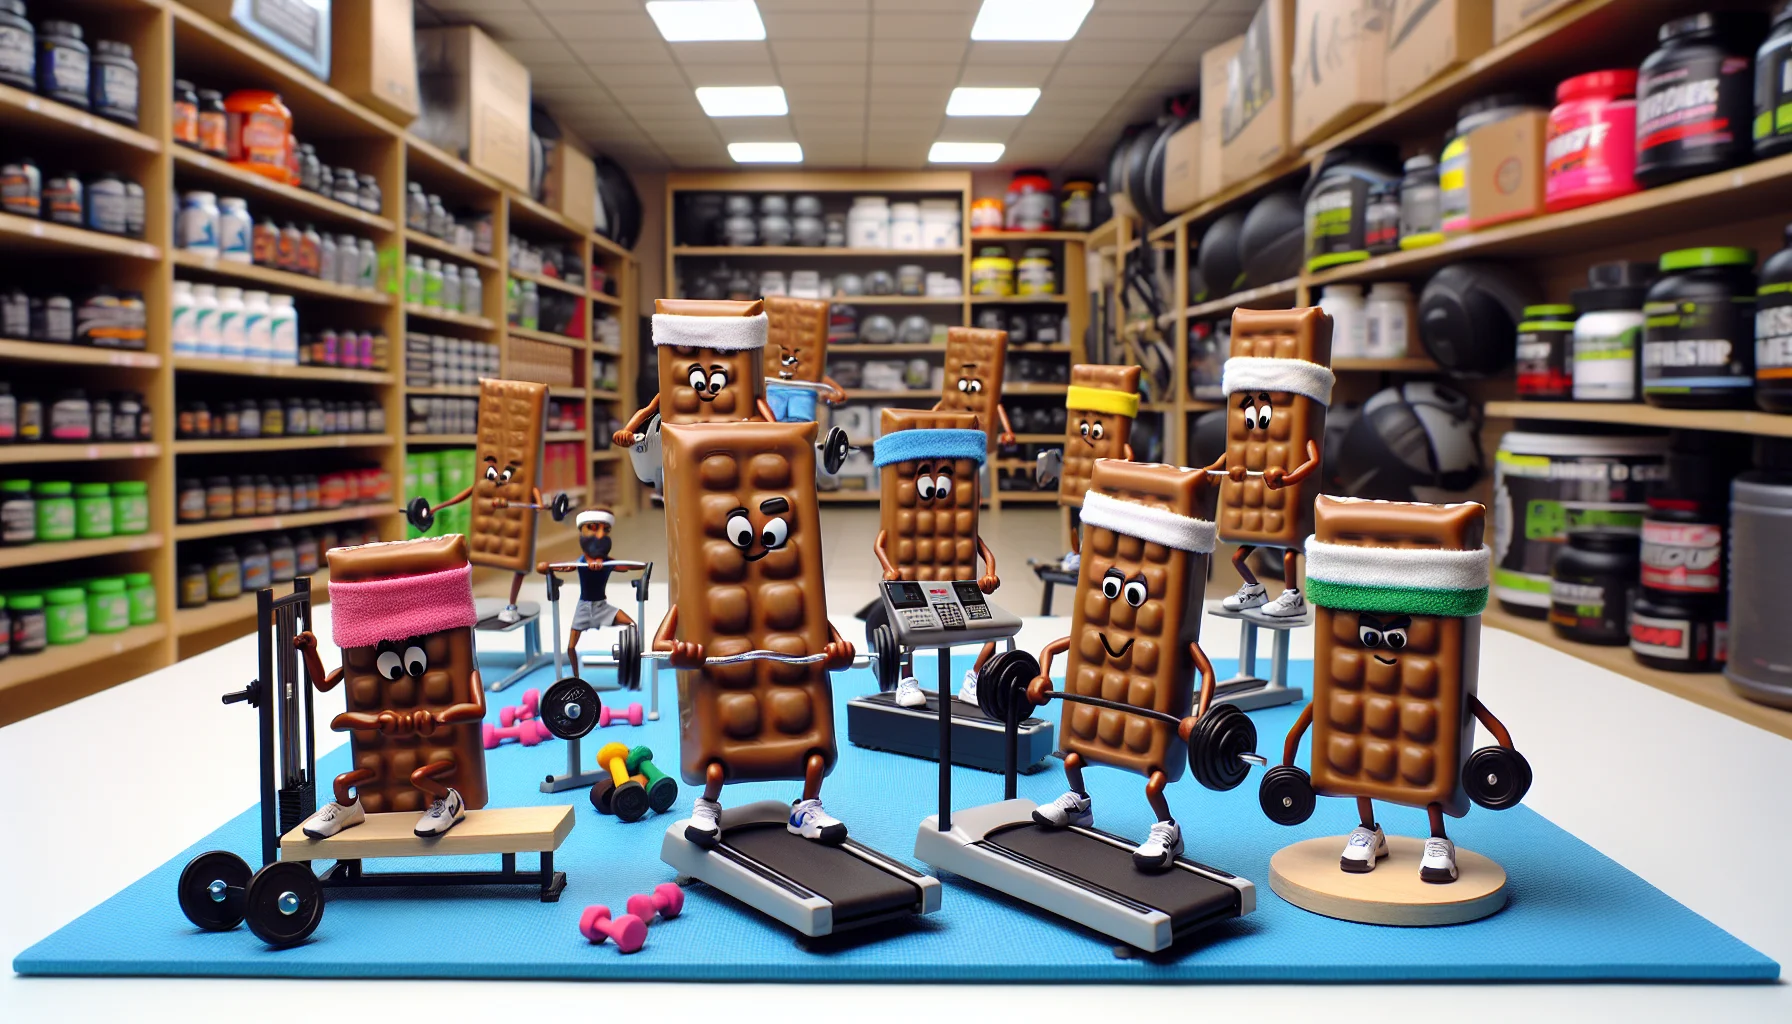 Imagine a humorous yet convincing scene meant to promote the use of nutritional supplements for athletic performance. Picture a shop full of various sports equipment. In the foreground, a group of animated protein bars are engaging in various athletic activities. Some are lifting tiny weights, others are sprinting on miniature treadmills, while others are attempting yoga poses. They all wear sweatbands and look extremely determined and focused. The scene is playful yet sends a clear message - these protein bars are made for those committed to their athletic goals.